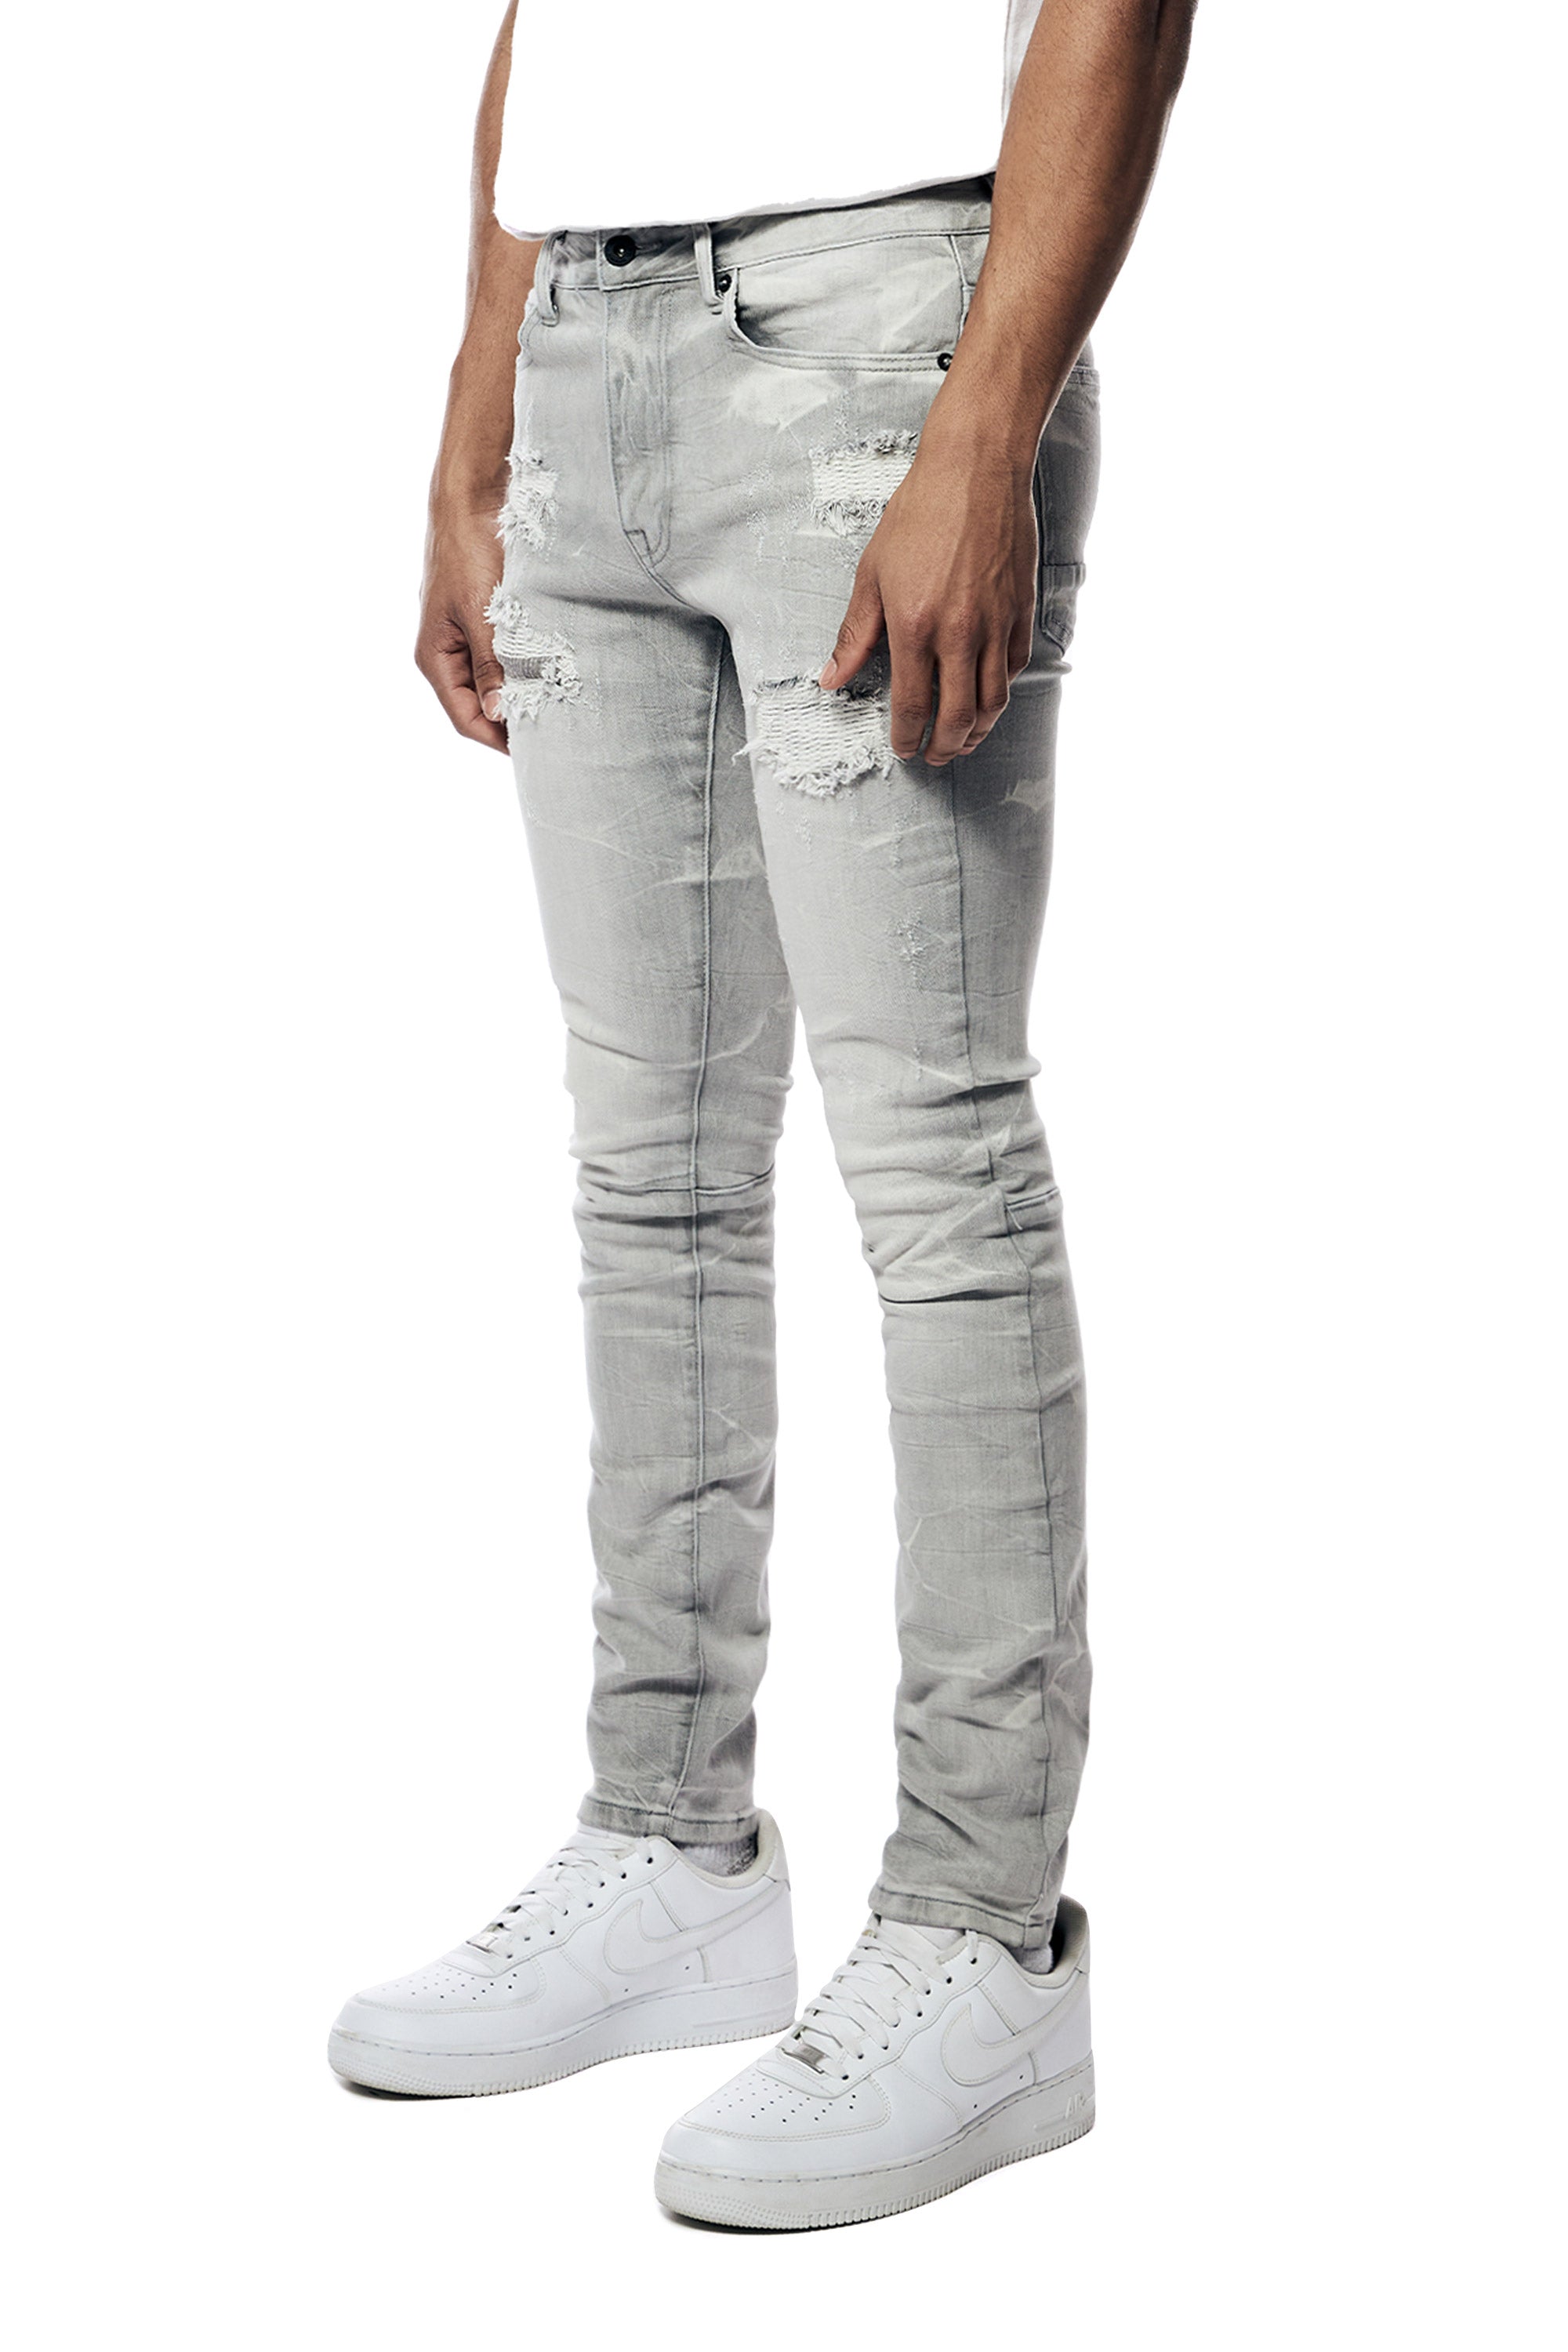 Rip & Repaired Lightning Washed Denim Jeans - Cloud Grey